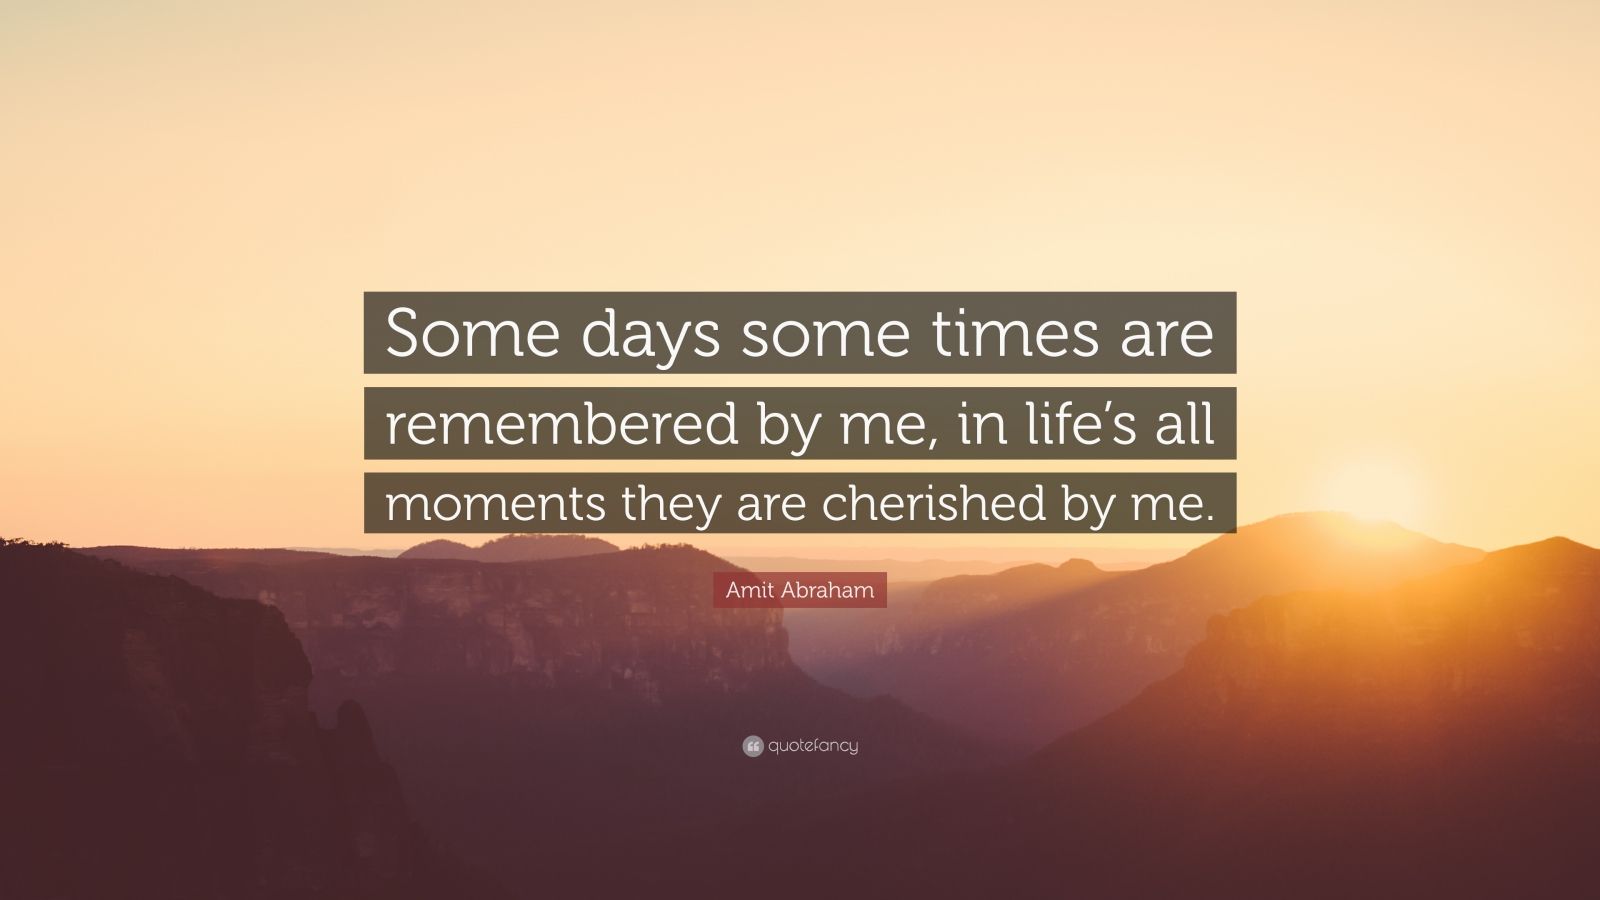 Amit Abraham Quote: “Some days some times are remembered by me, in life ...